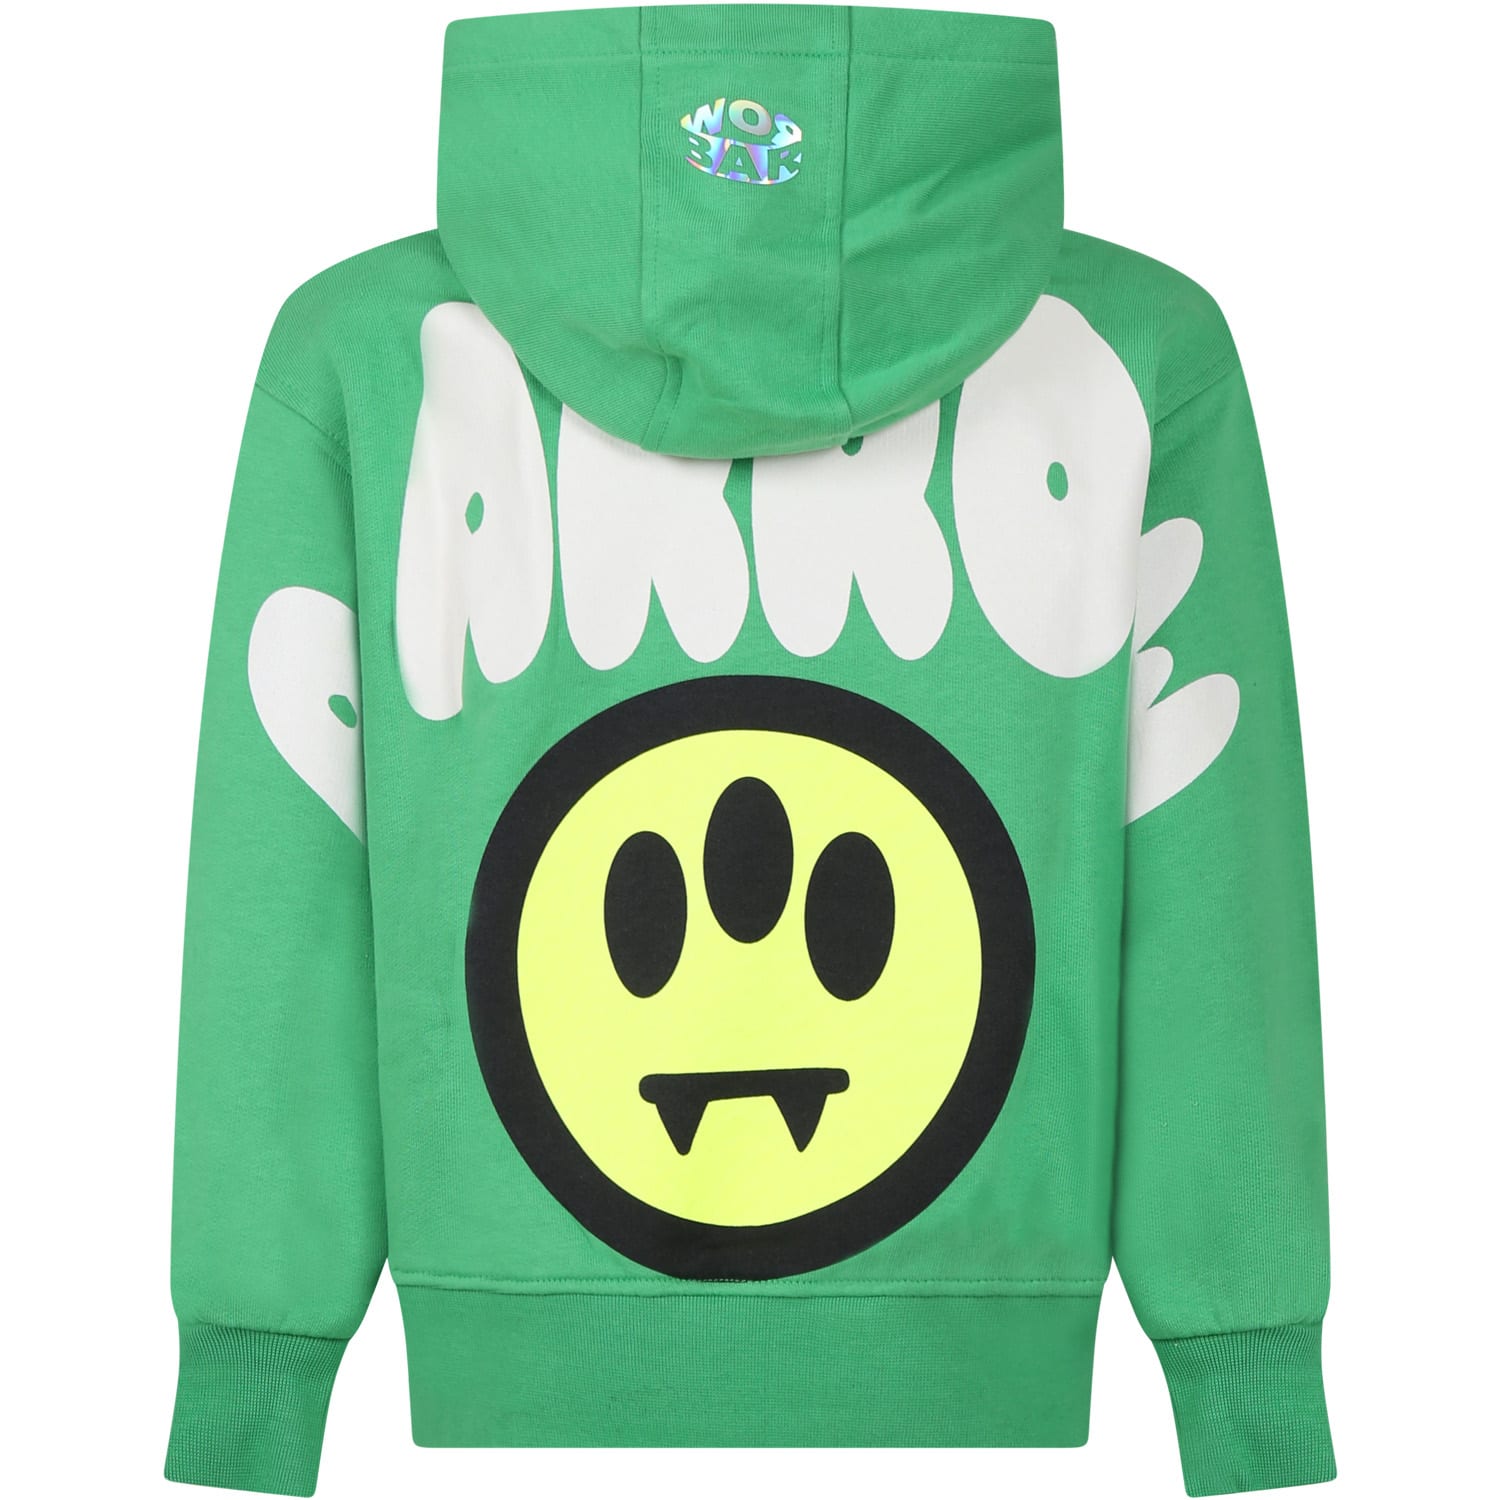 Barrow Green Sweatshirt For Kids With Logo And Iconic Smiley Face In Fern Green